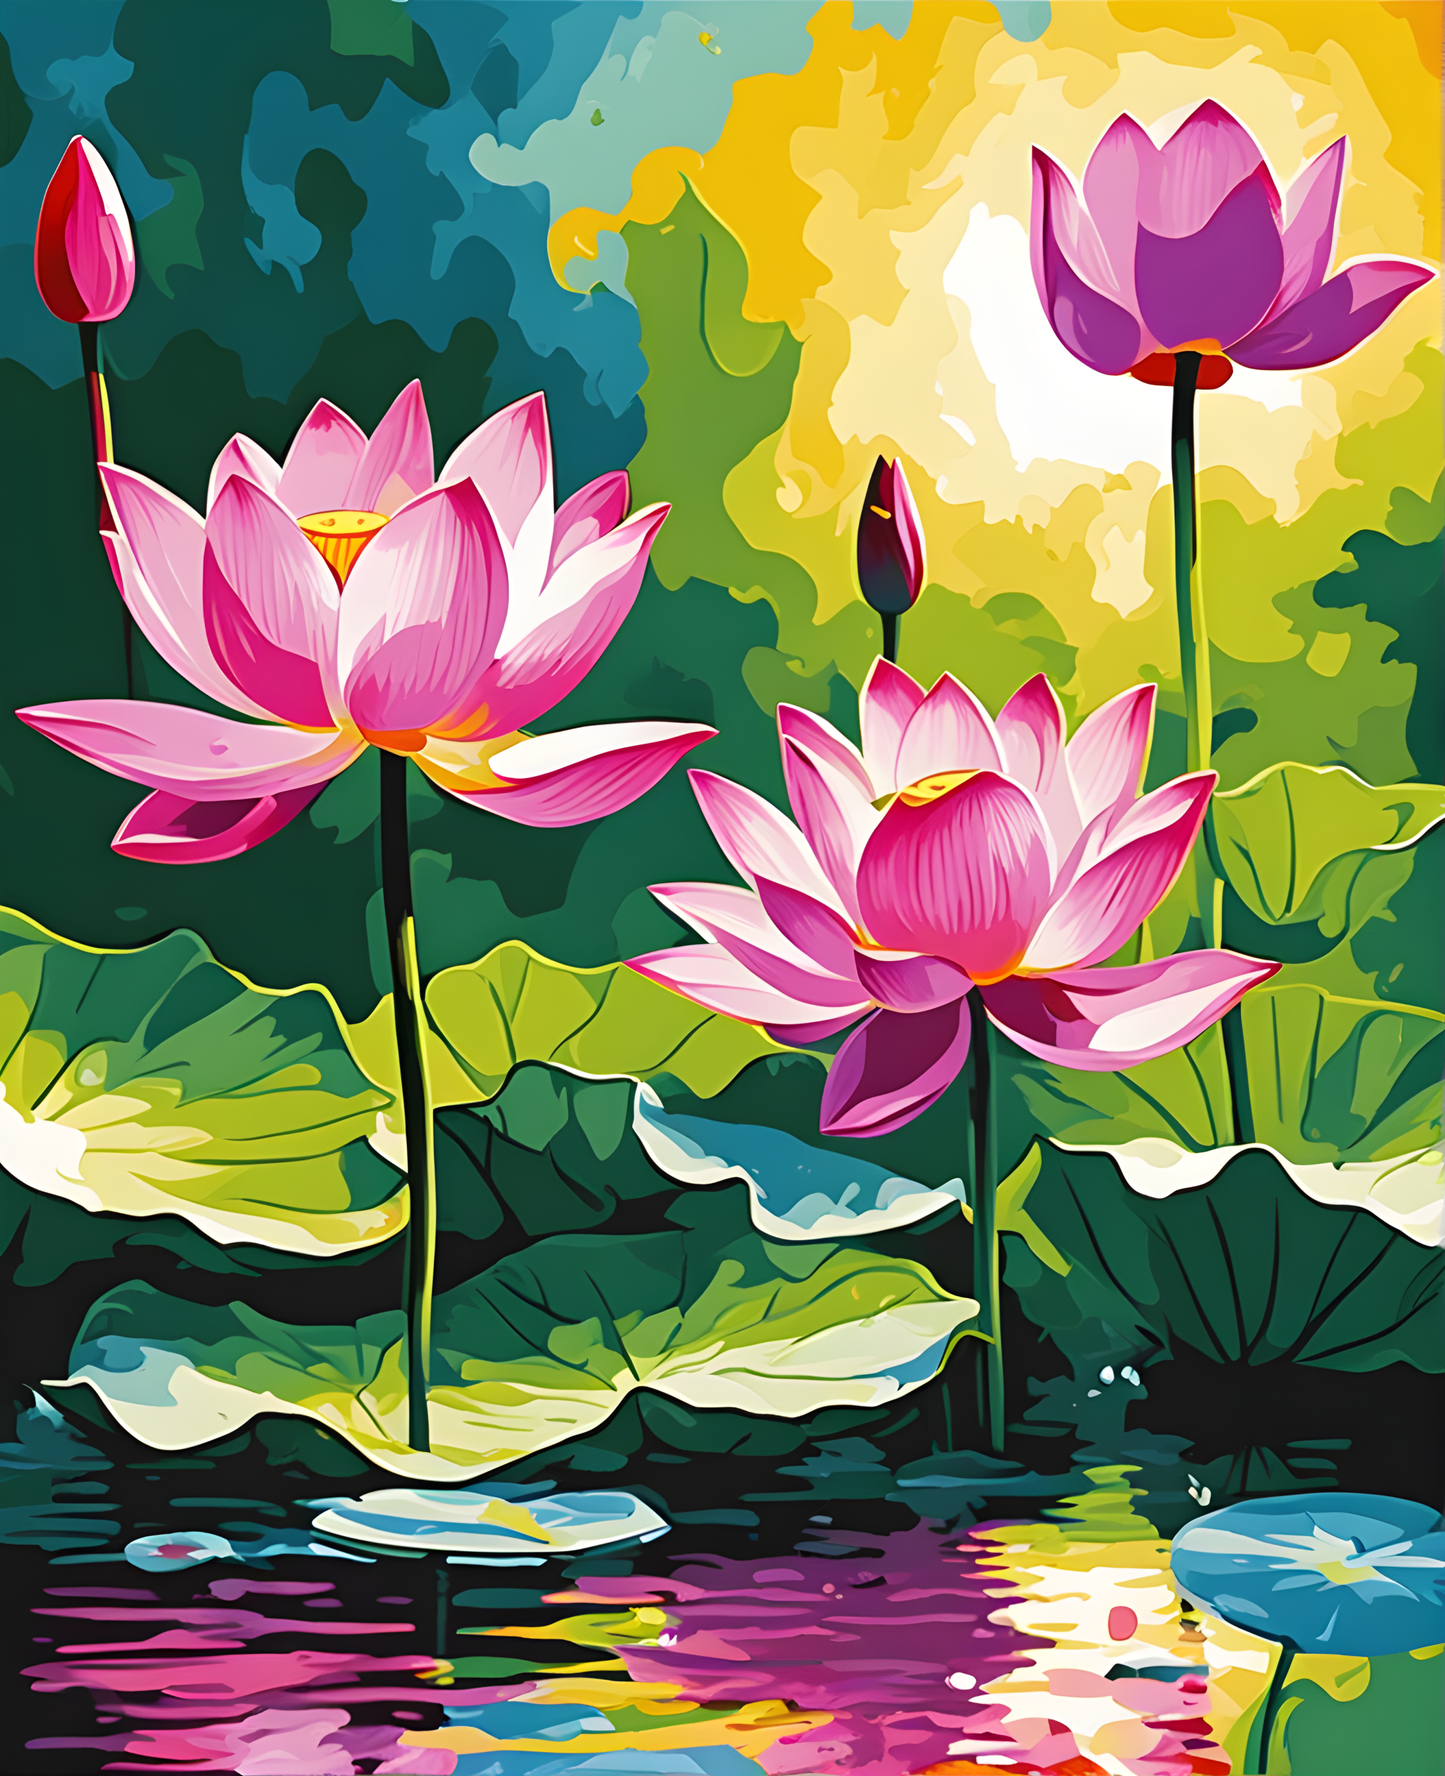 Flowers Collection OD (77) - Lotus - Van-Go Paint-By-Number Kit